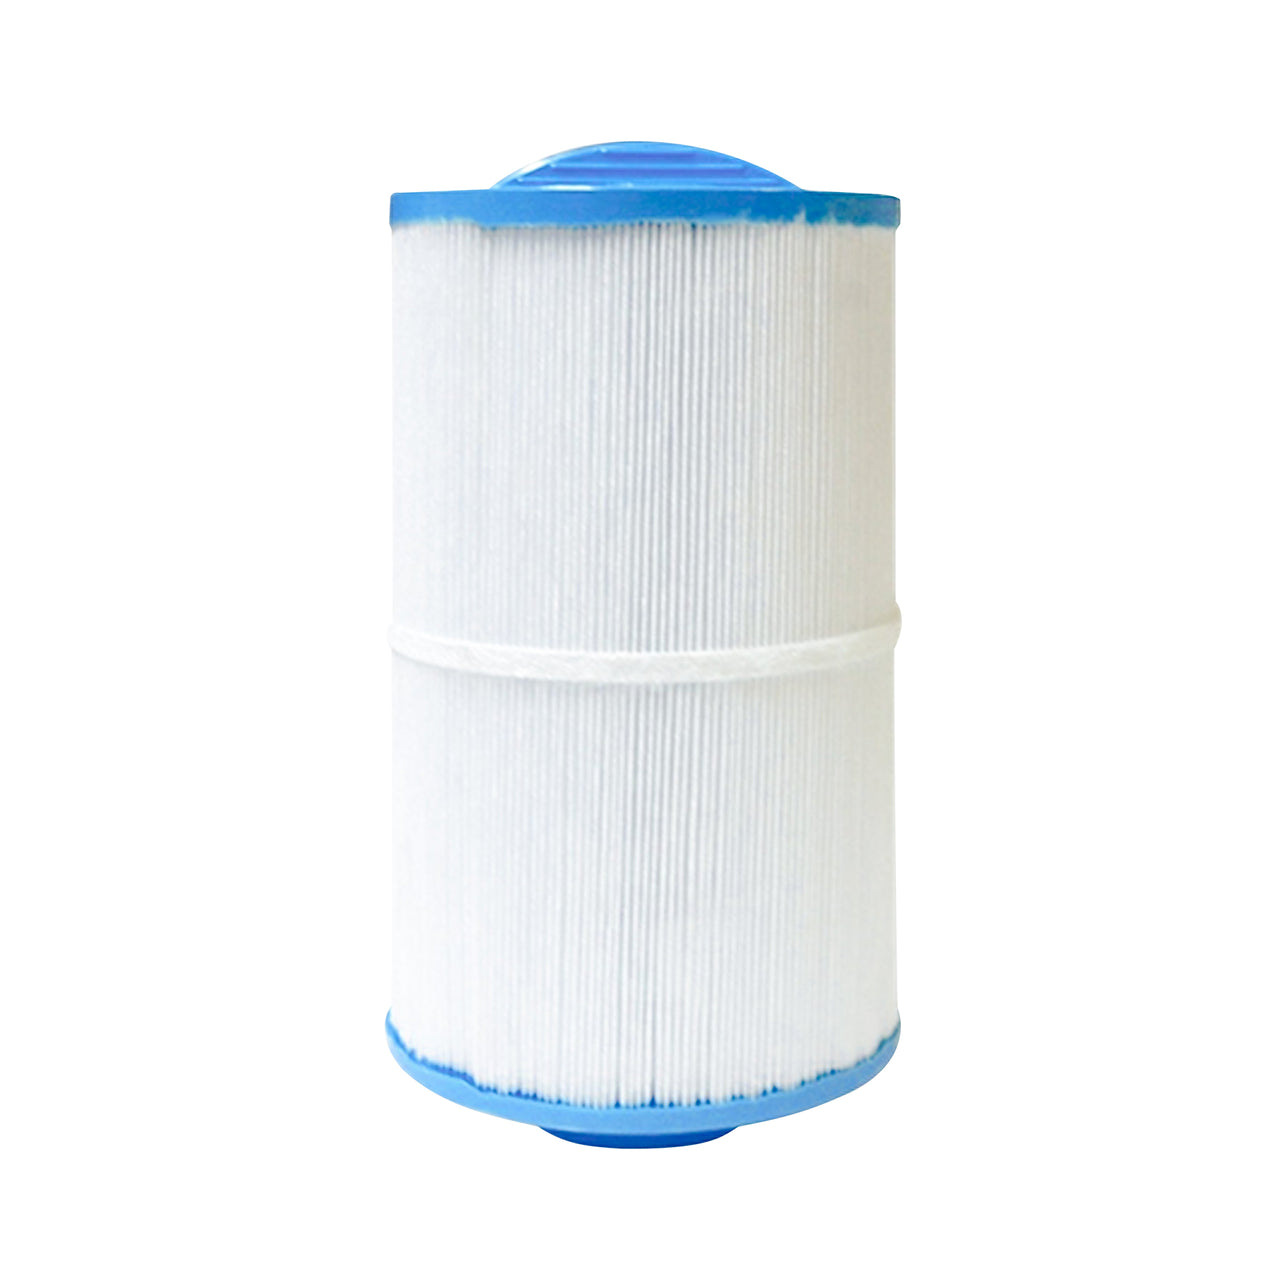 Filter: 2540-384 for Jacuzzi J-460 - Hot Tub Store